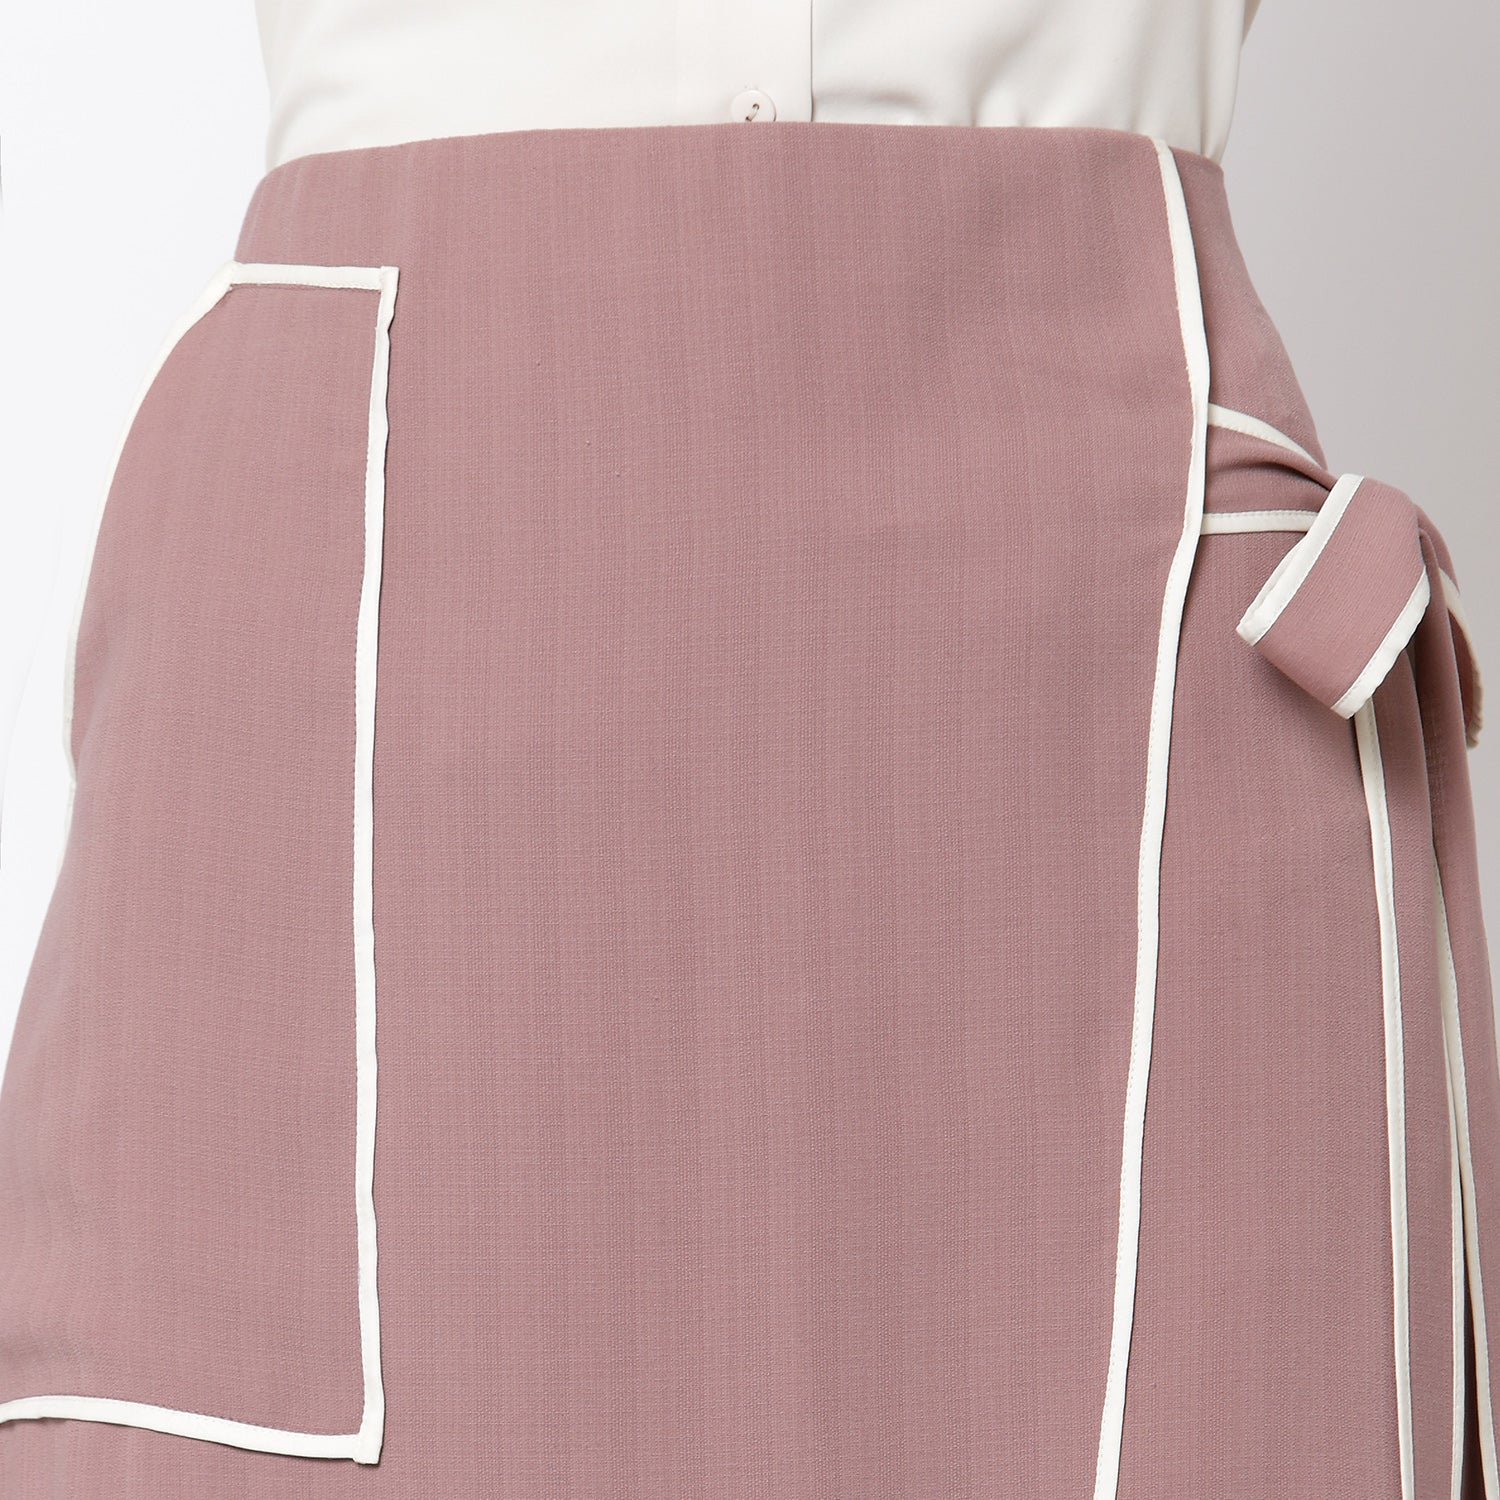 Pink Asymmetrical Skirt With Off White Piping